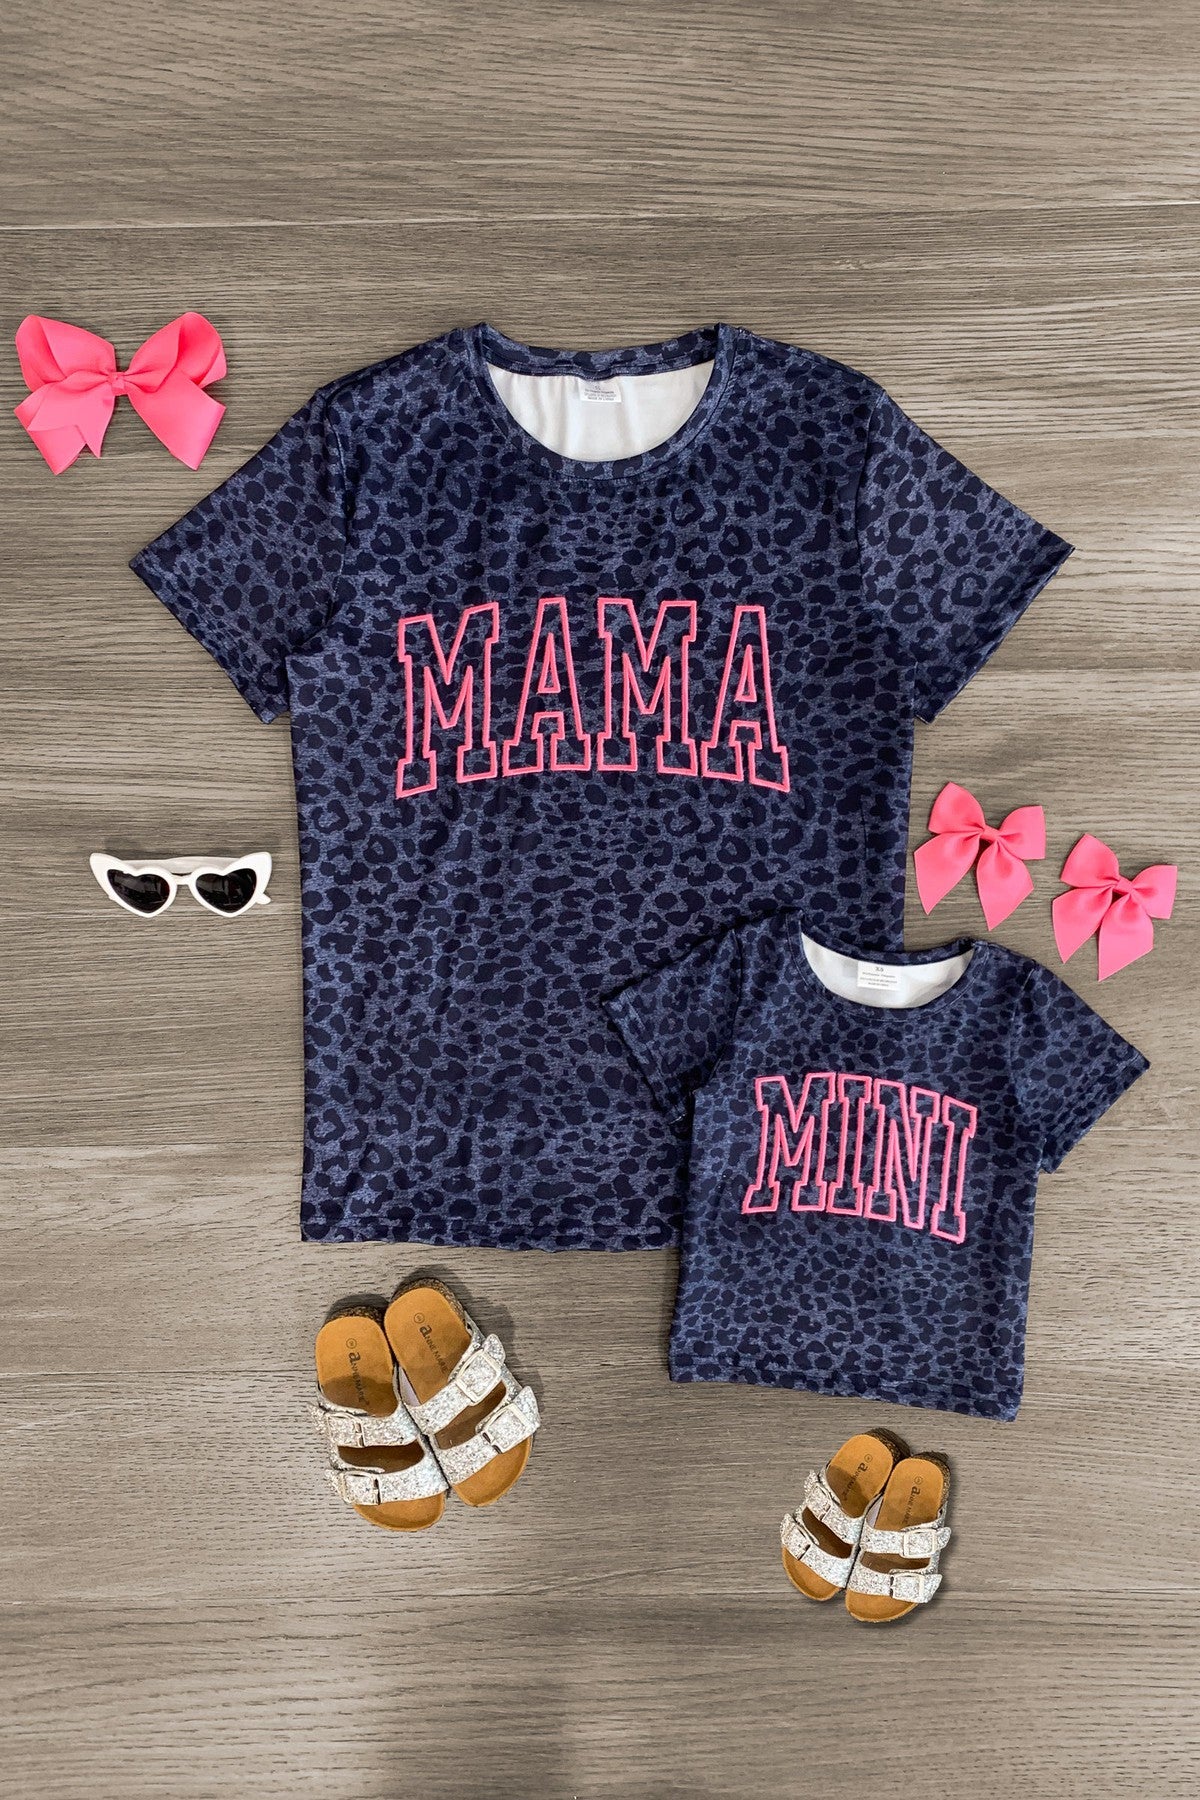 Mom & Me - "Mama & Mini" Navy Leopard Top - Sparkle in Pink